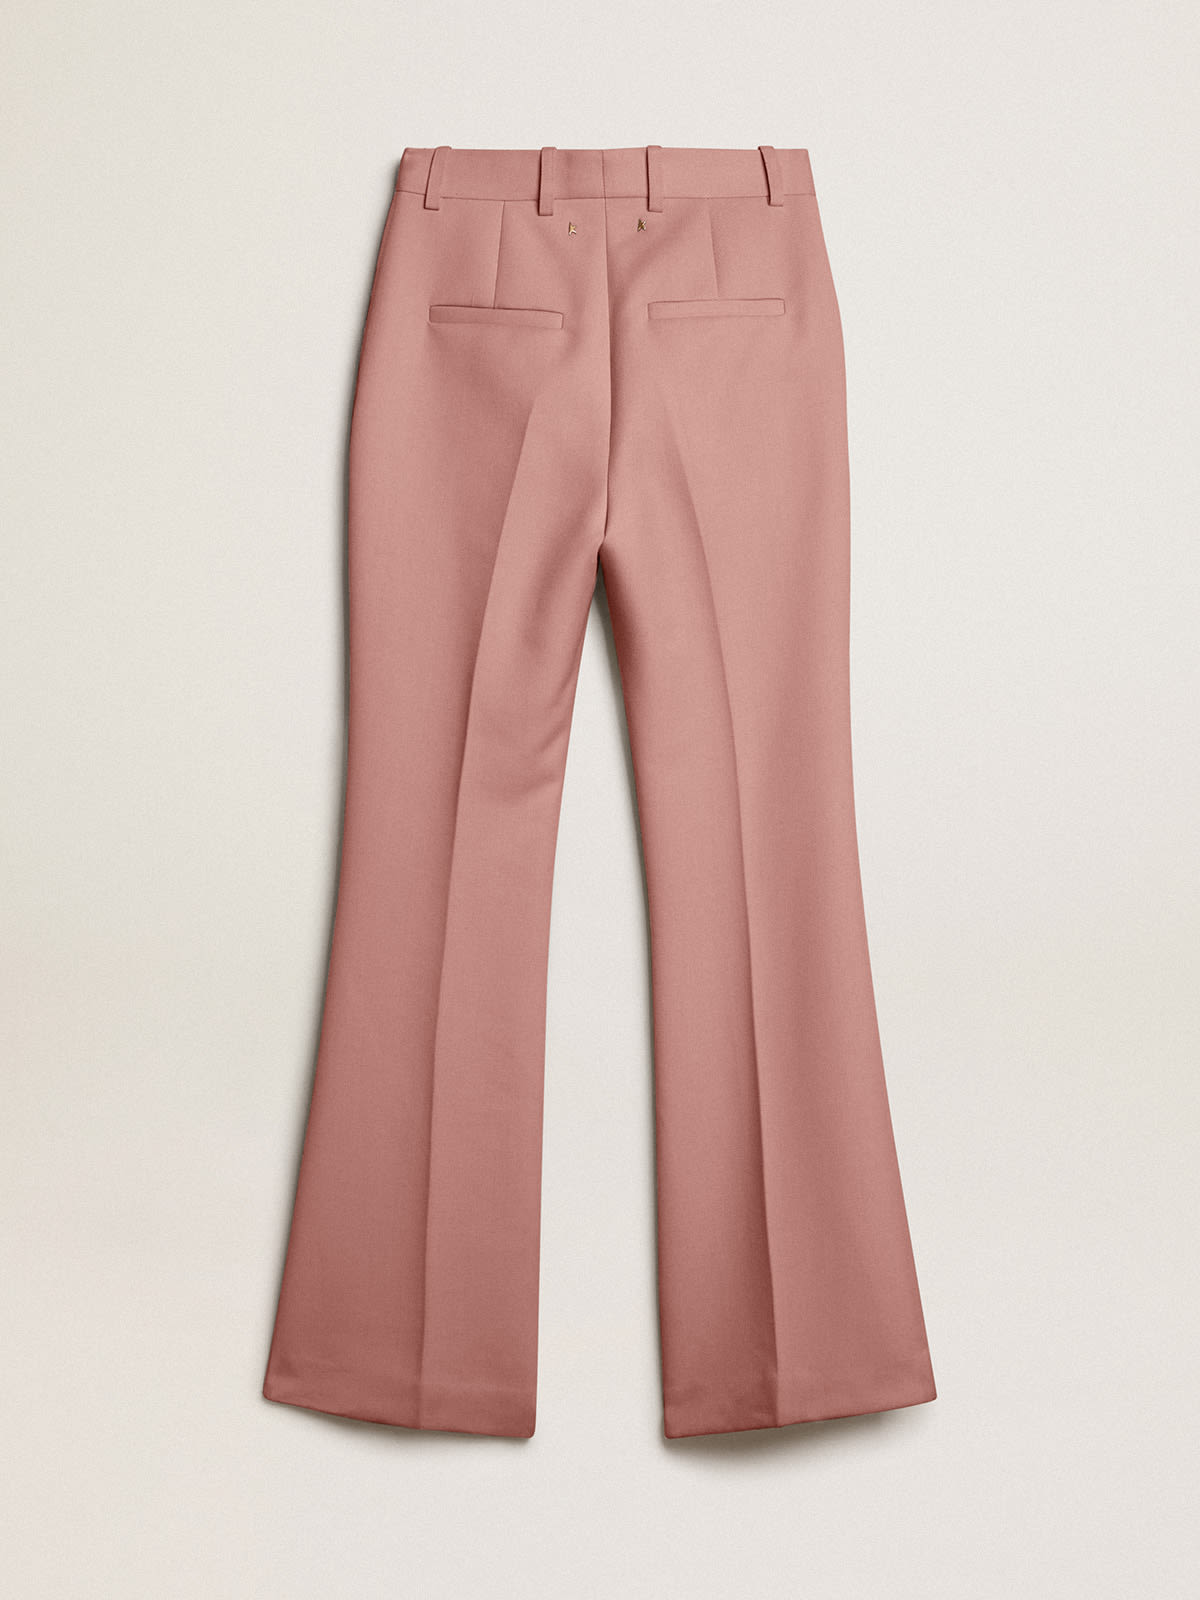 Golden Goose - Pants in pink tailoring fabric in 